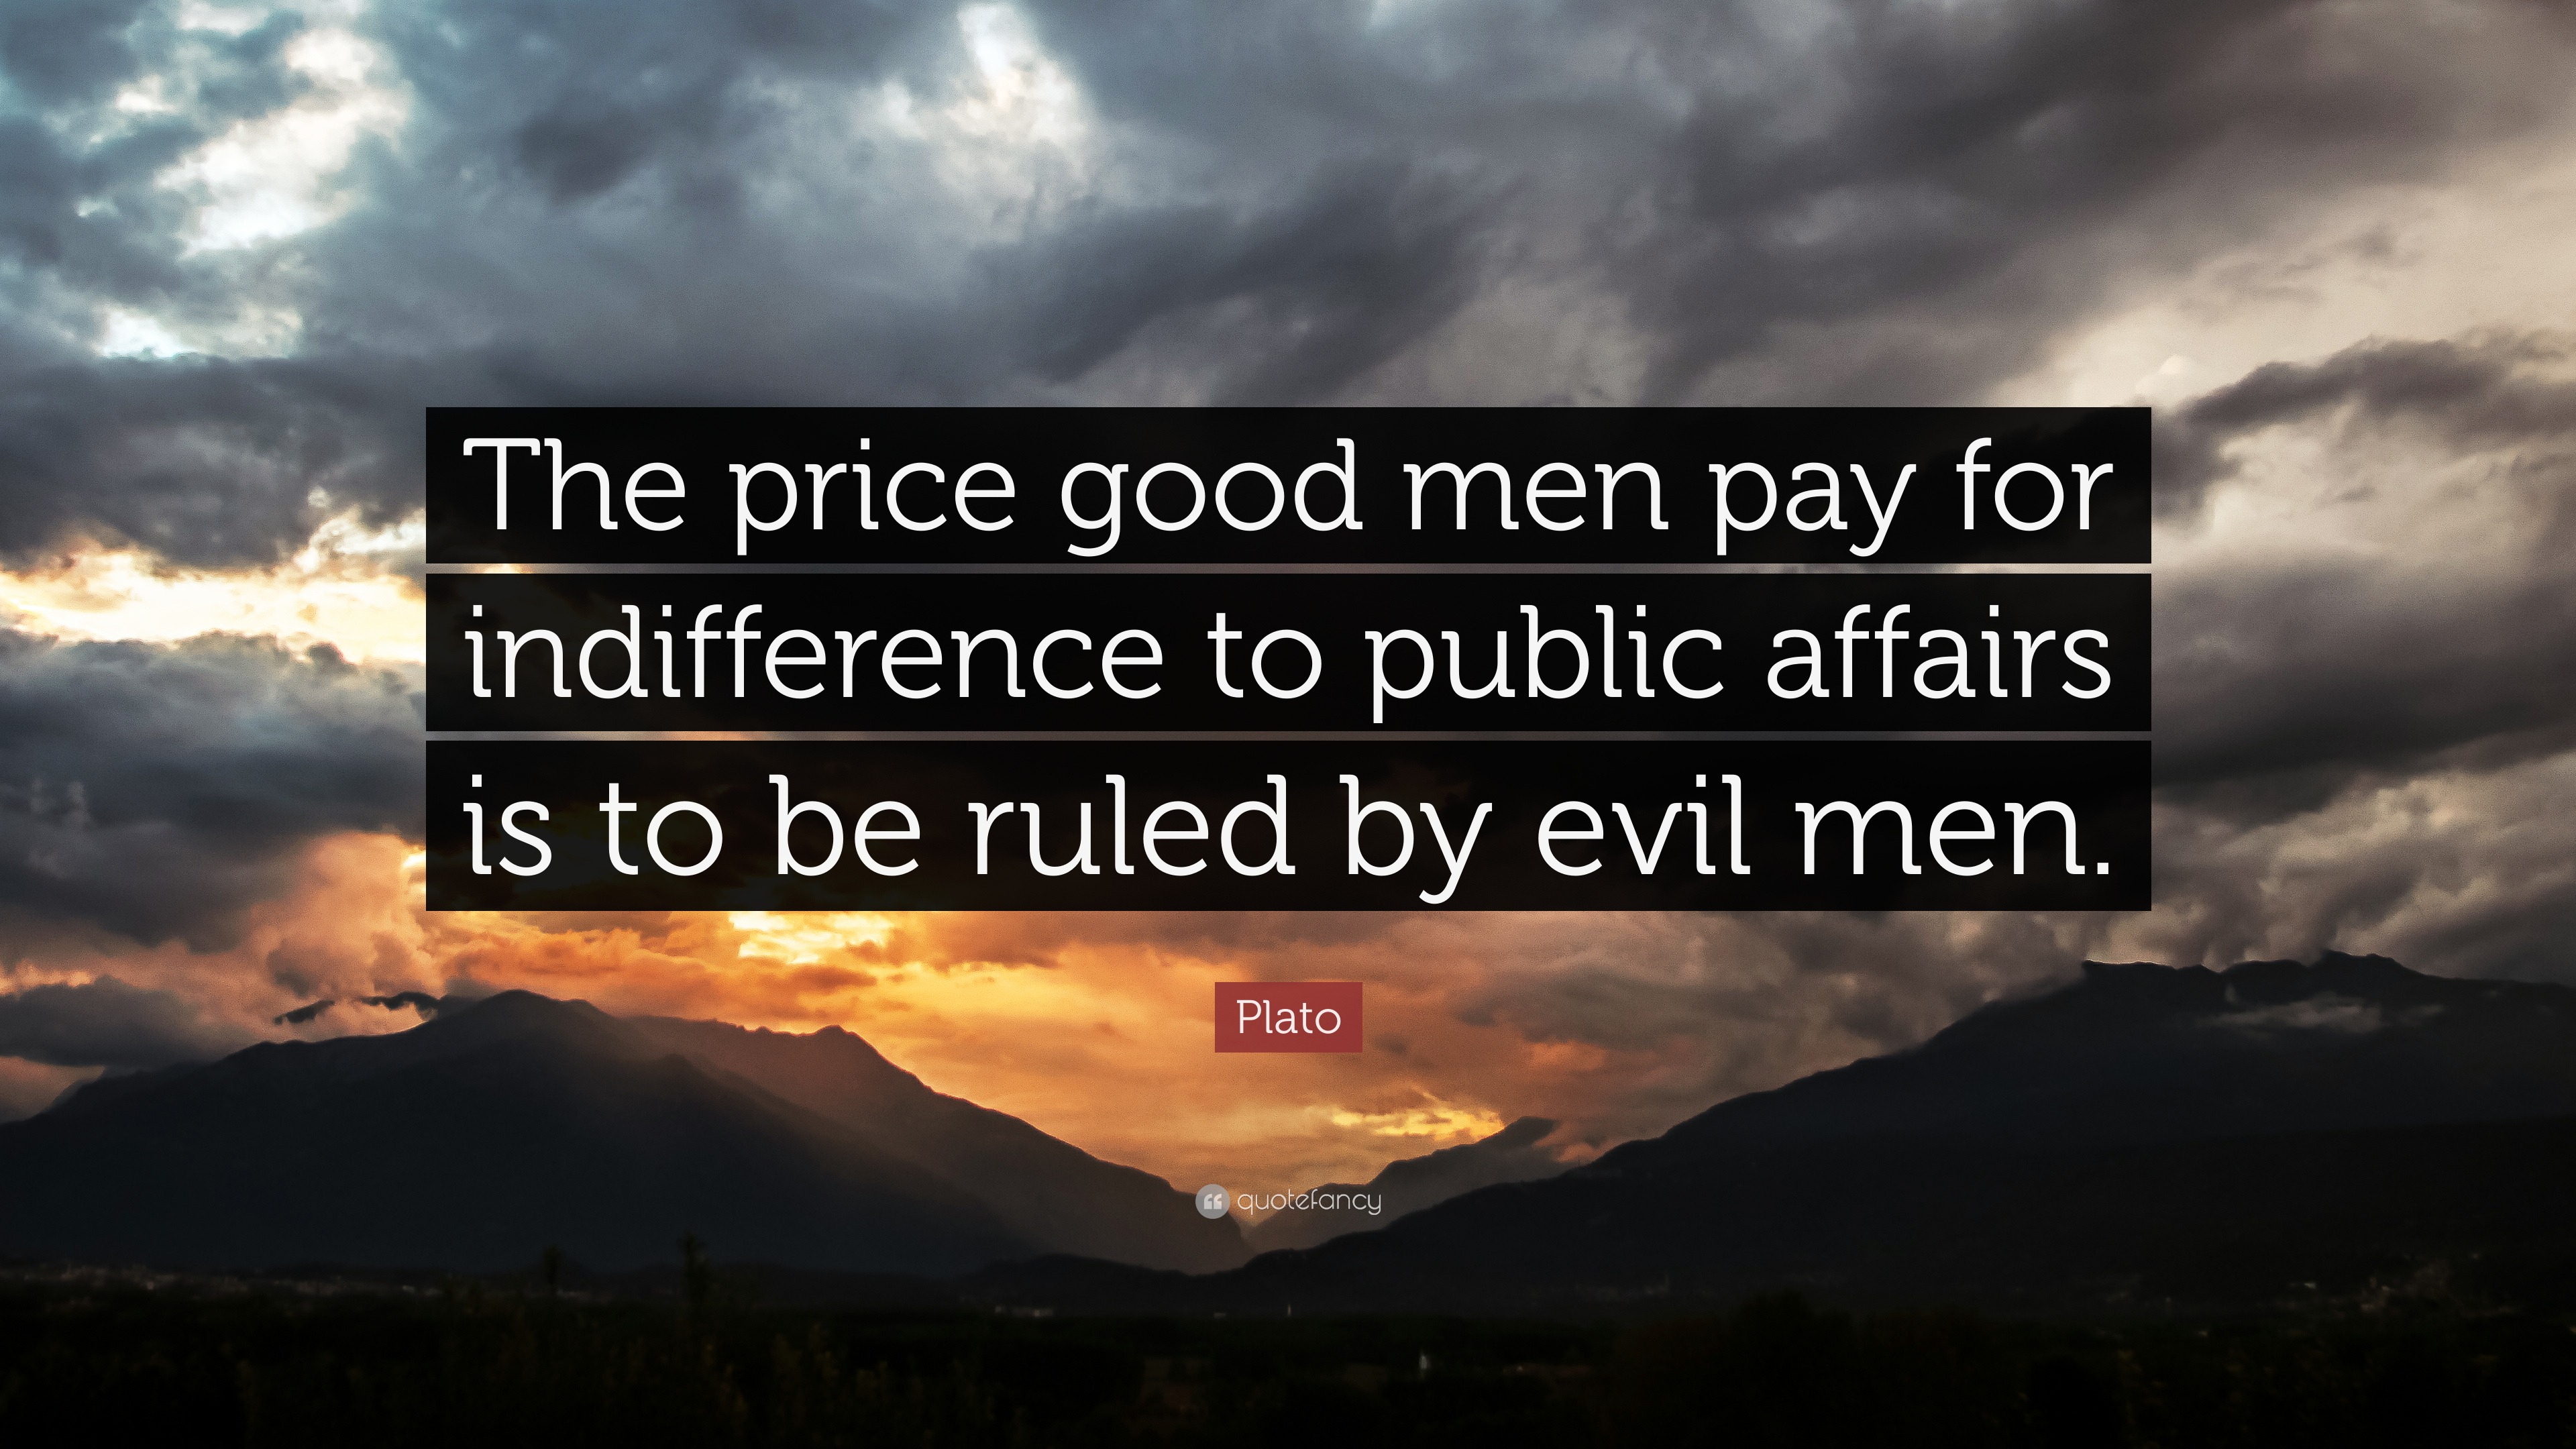 Plato Quote: "The price good men pay for indifference to ...